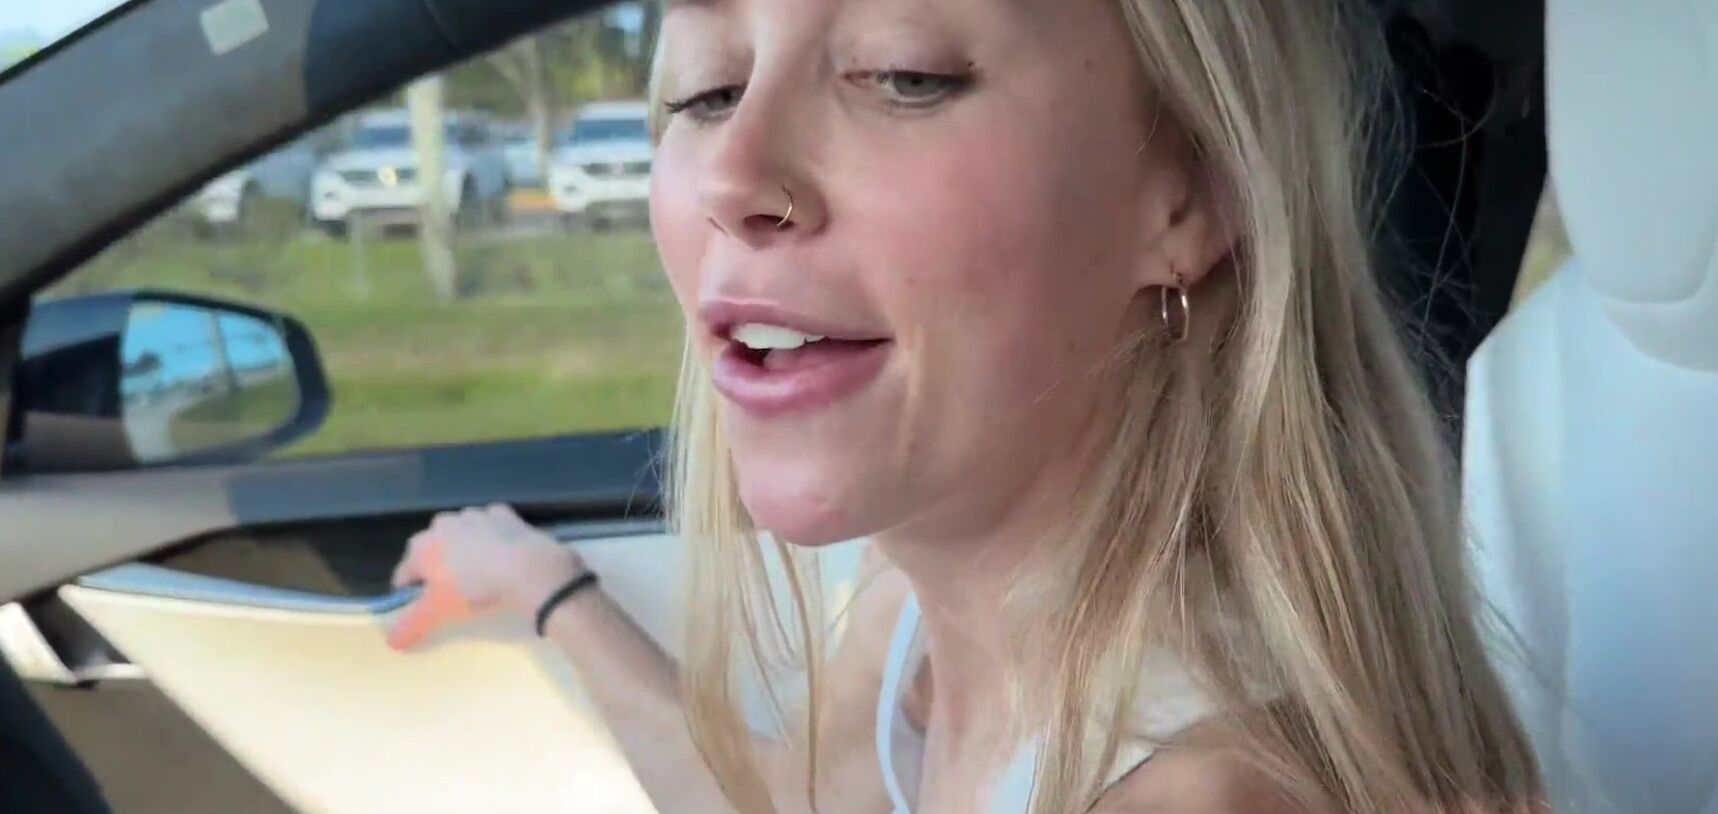 Slim Body Super Hot Blonde Pays Driver Another Way, Public Sex Video - XXX Video picture